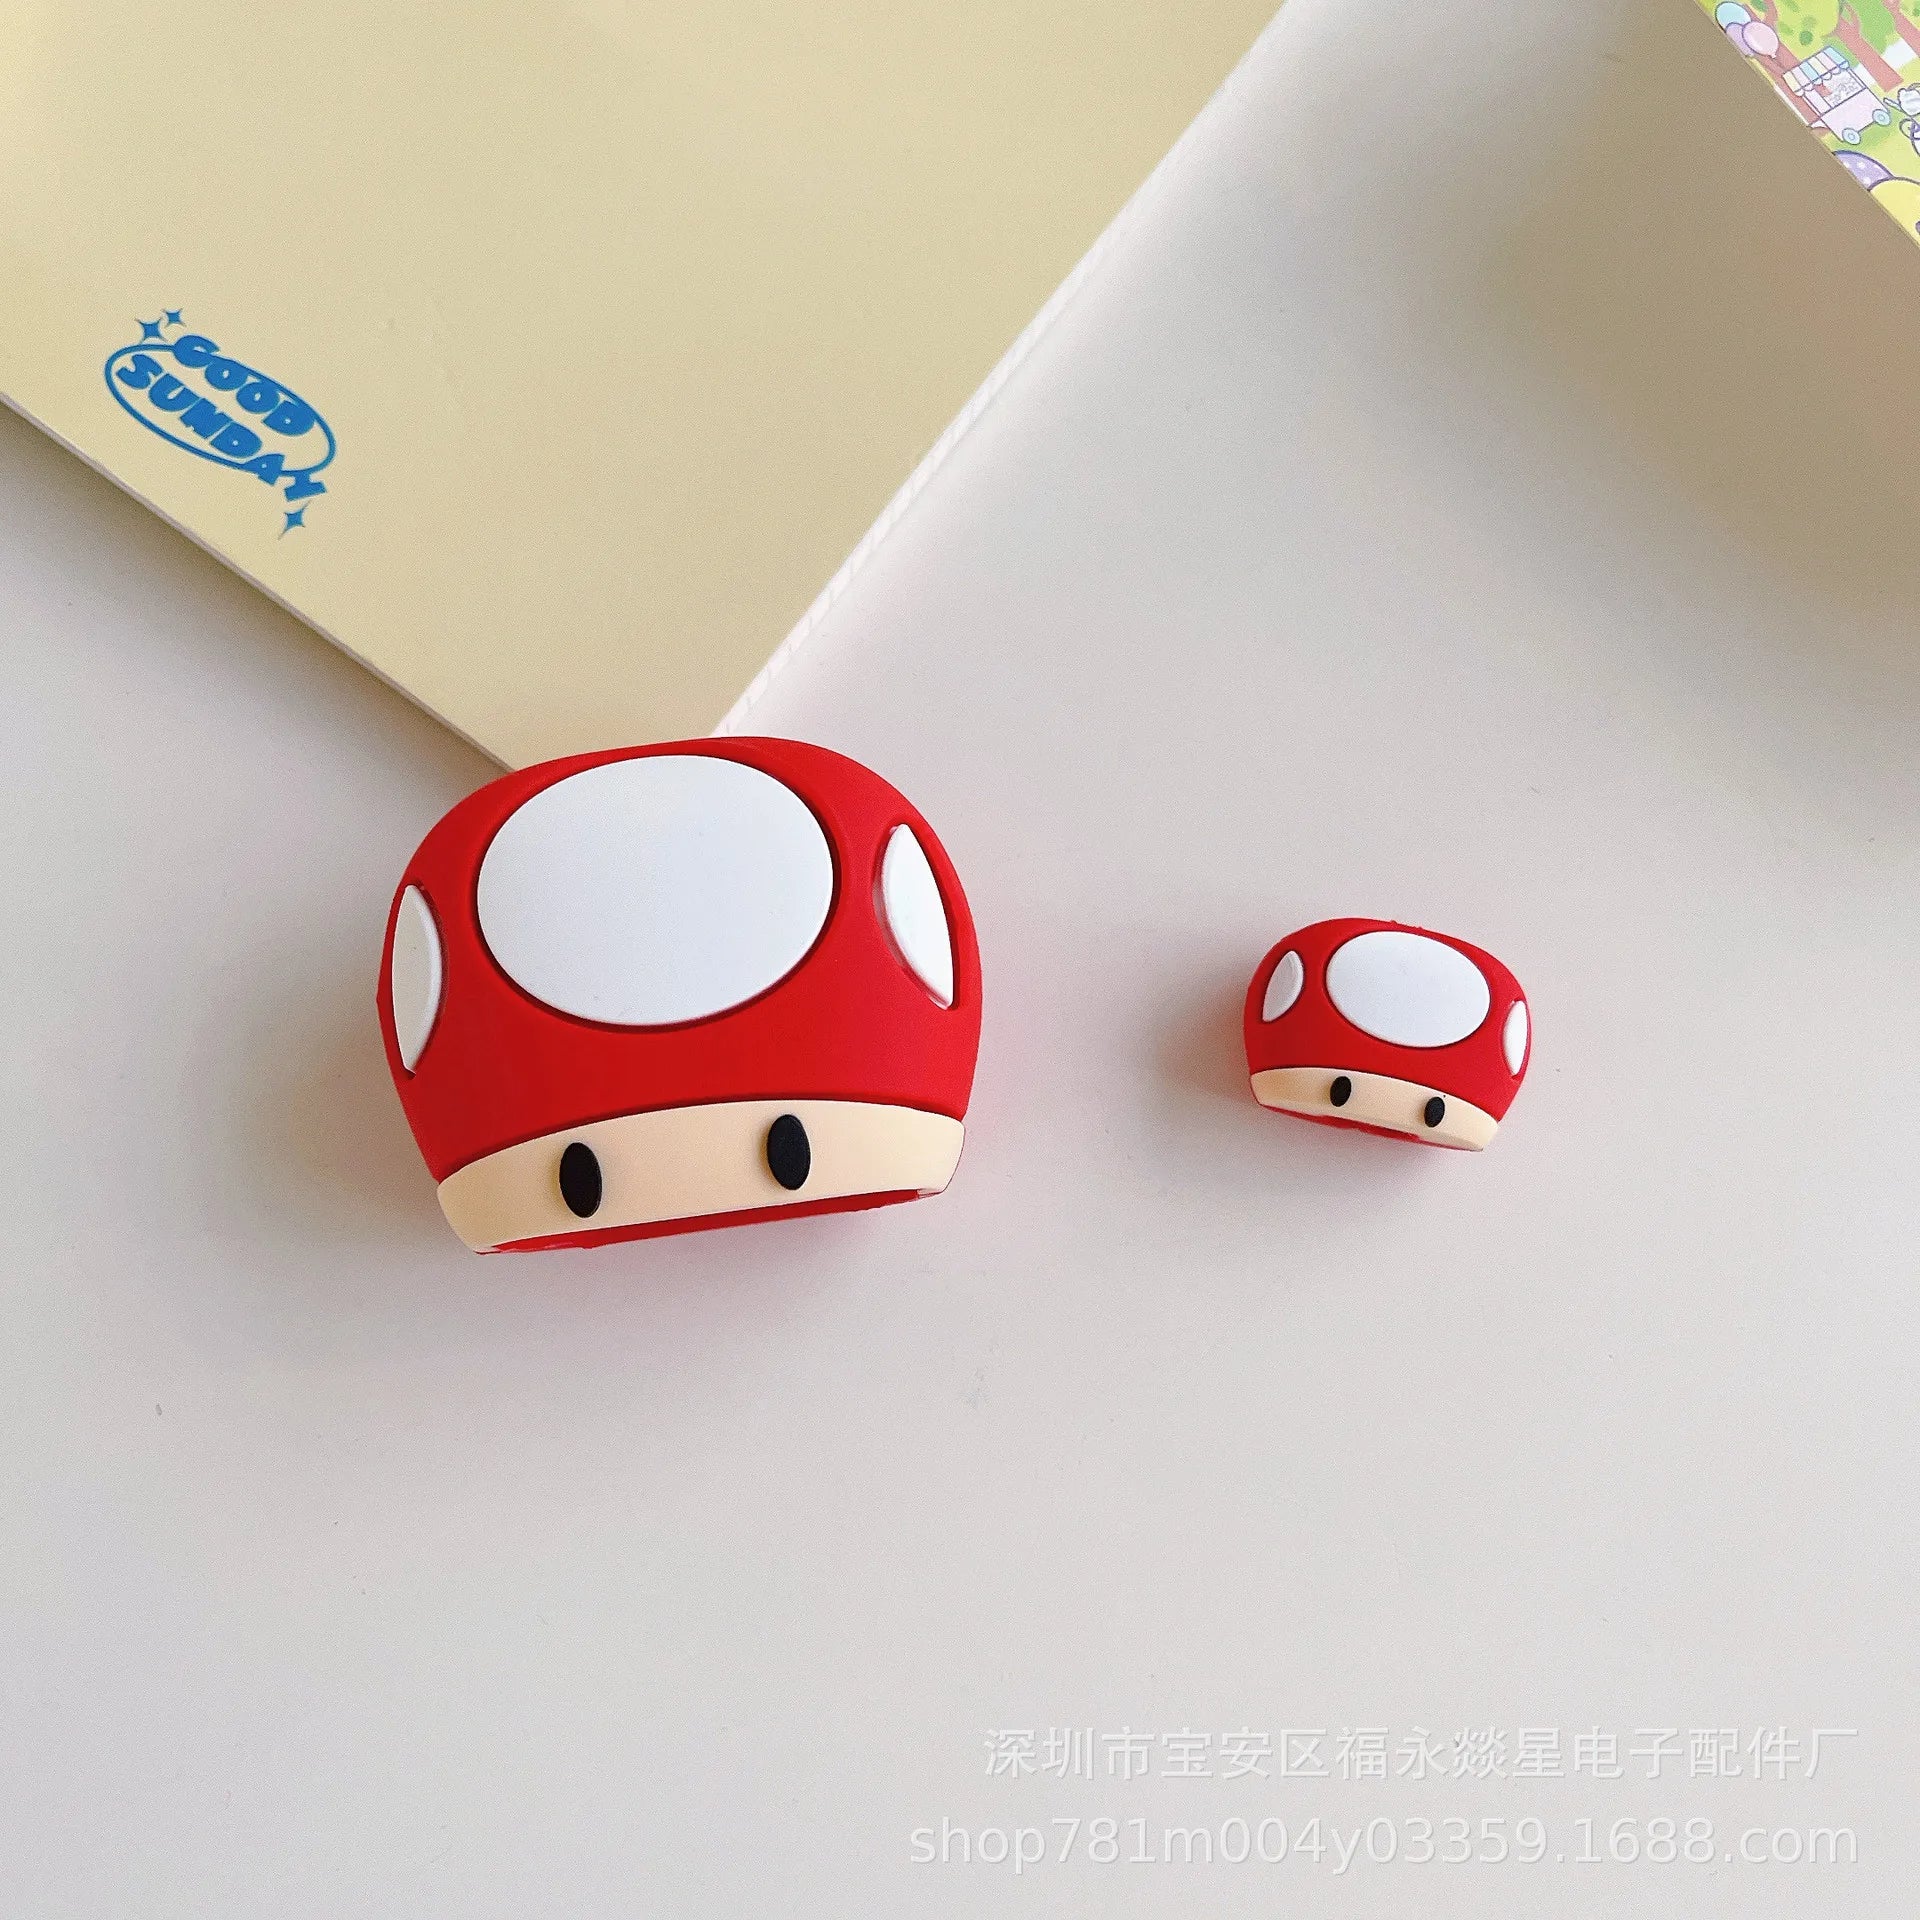 Iphone Charger Case Cover - Super Mario Bros Red